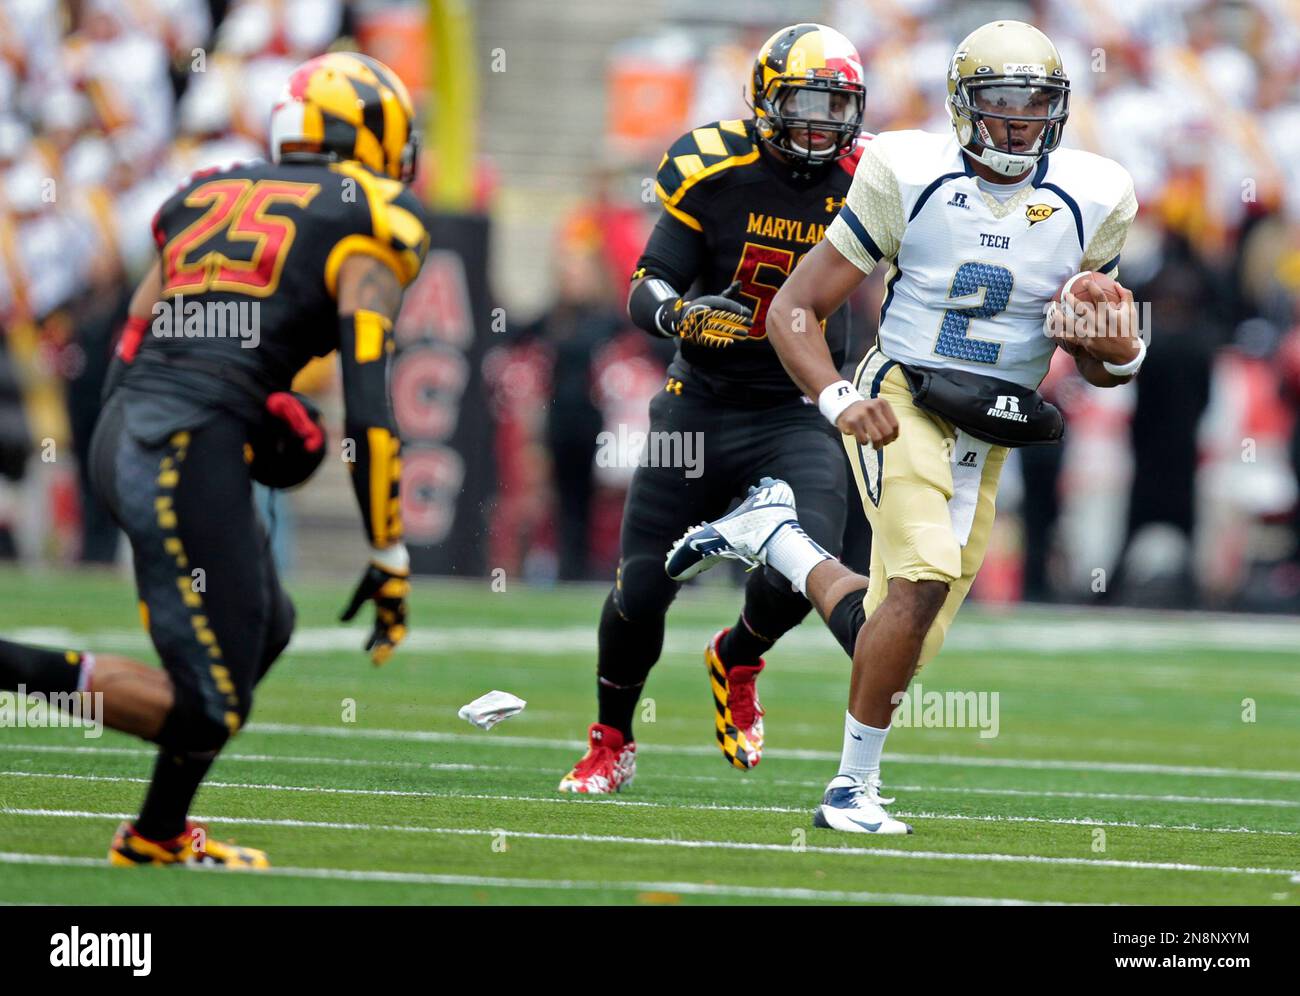 Georgia Tech quarterback Vad Lee (2) runs the ball as Maryland defensive  back Dexter McDougle (25) and linebacker Darin Drakeford (52) defend during  the first half of an NCAA college football game,